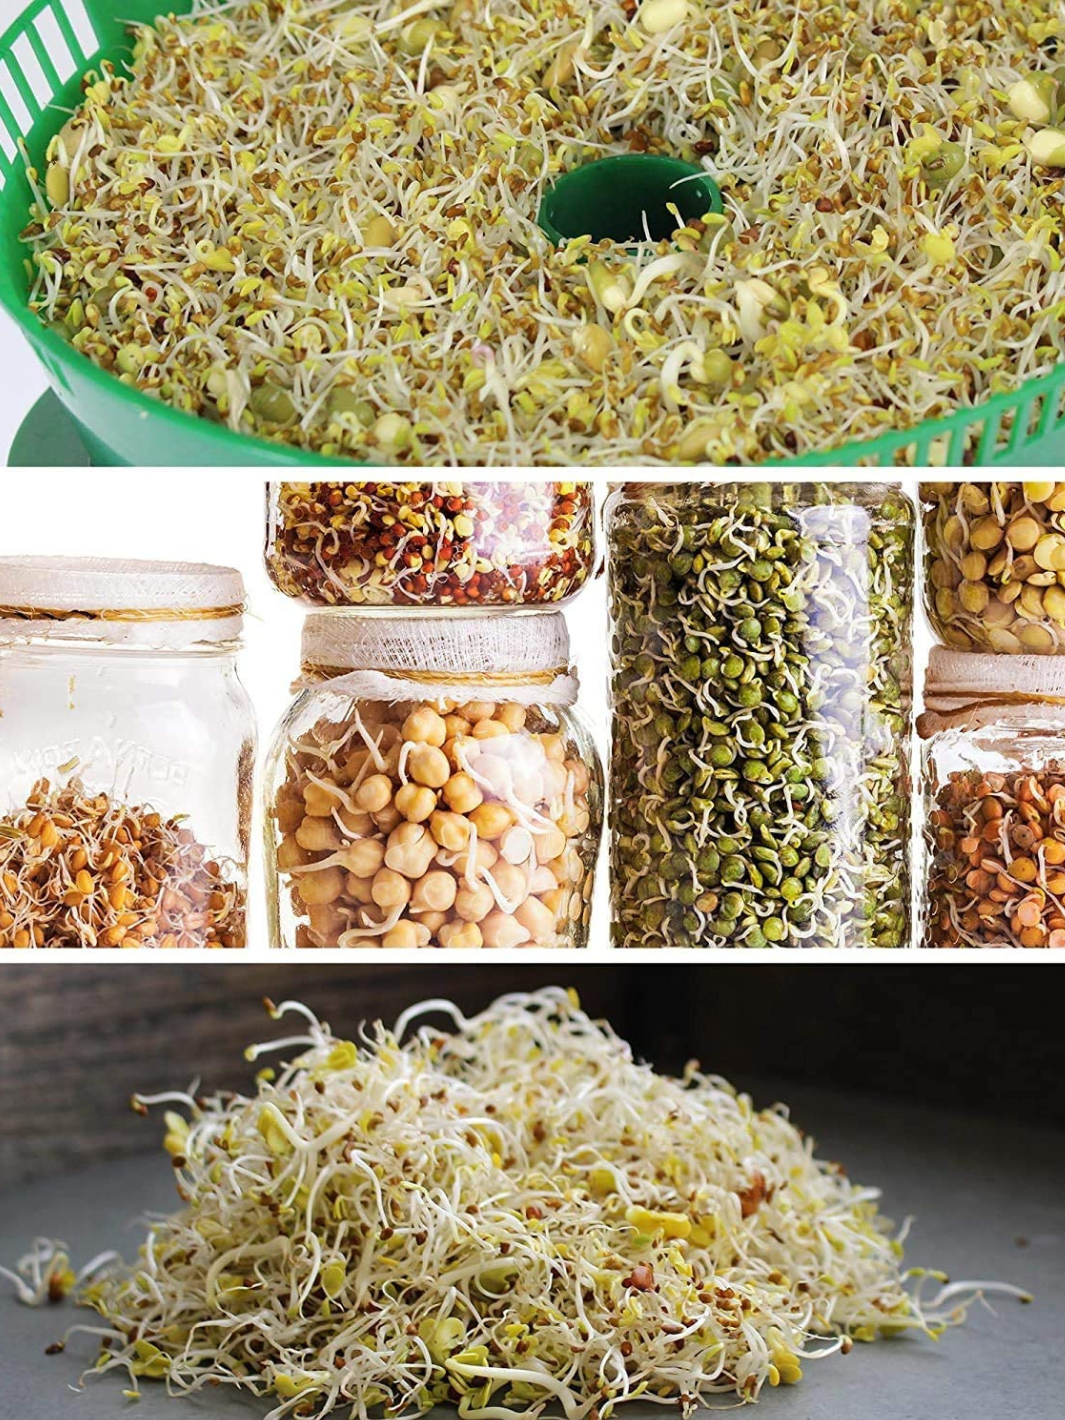 Sprouts from Handy Pantry Organic Protein Powerhouse Mix Sprouting Seeds